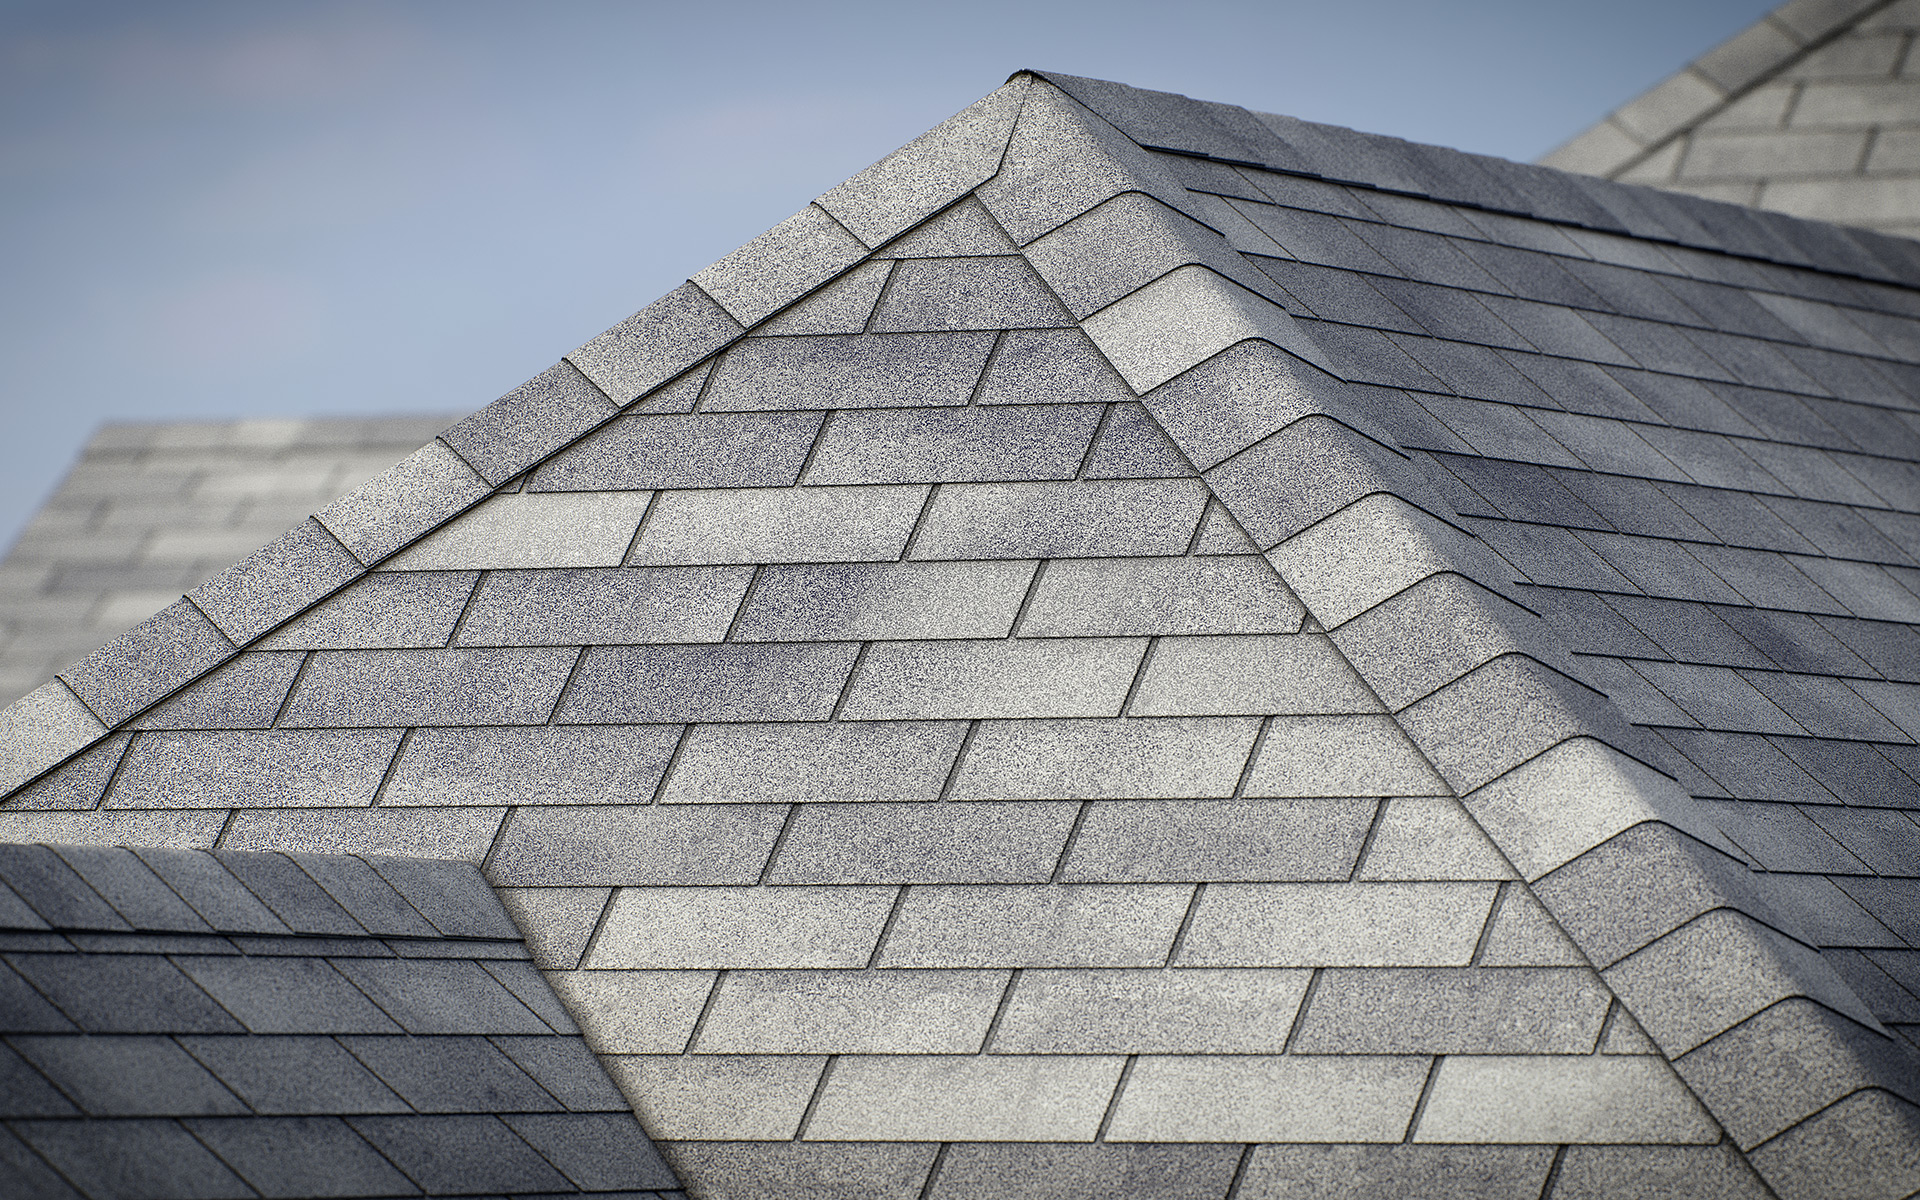 3-tab asphalt roof shingles grey color 3D model preset for 3dsmax and RailClone. Rendered with vray, made for arch-viz.